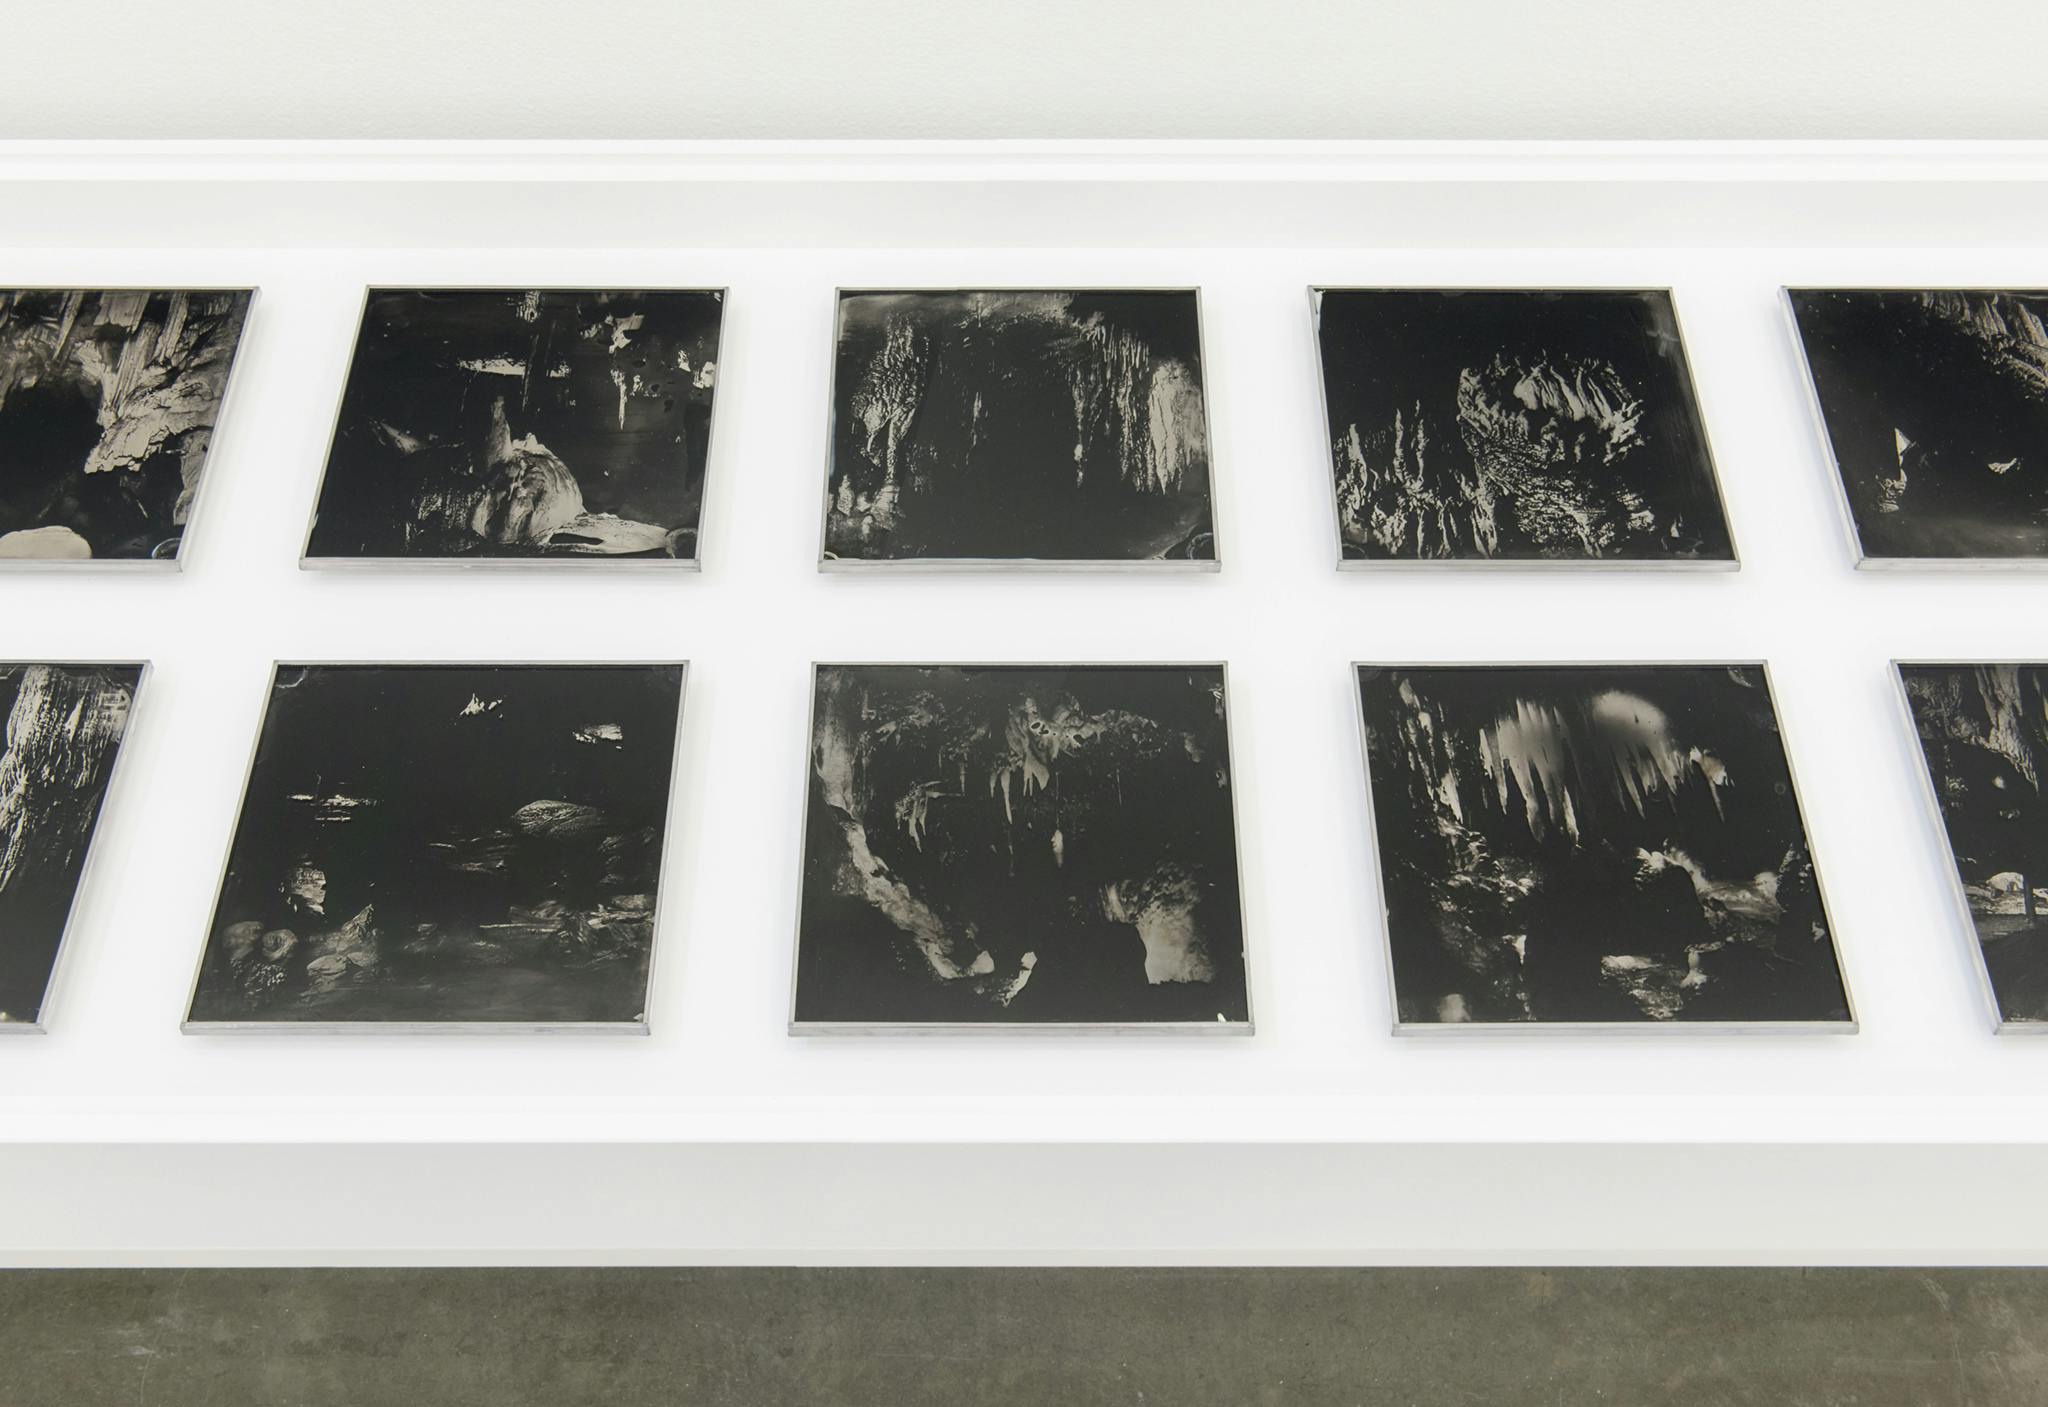 Ten photographs are visible on a display vitrine in a gallery. The square, low-exposure images show the inside of caves. The images reveal various stalactites and stalagmites formations.